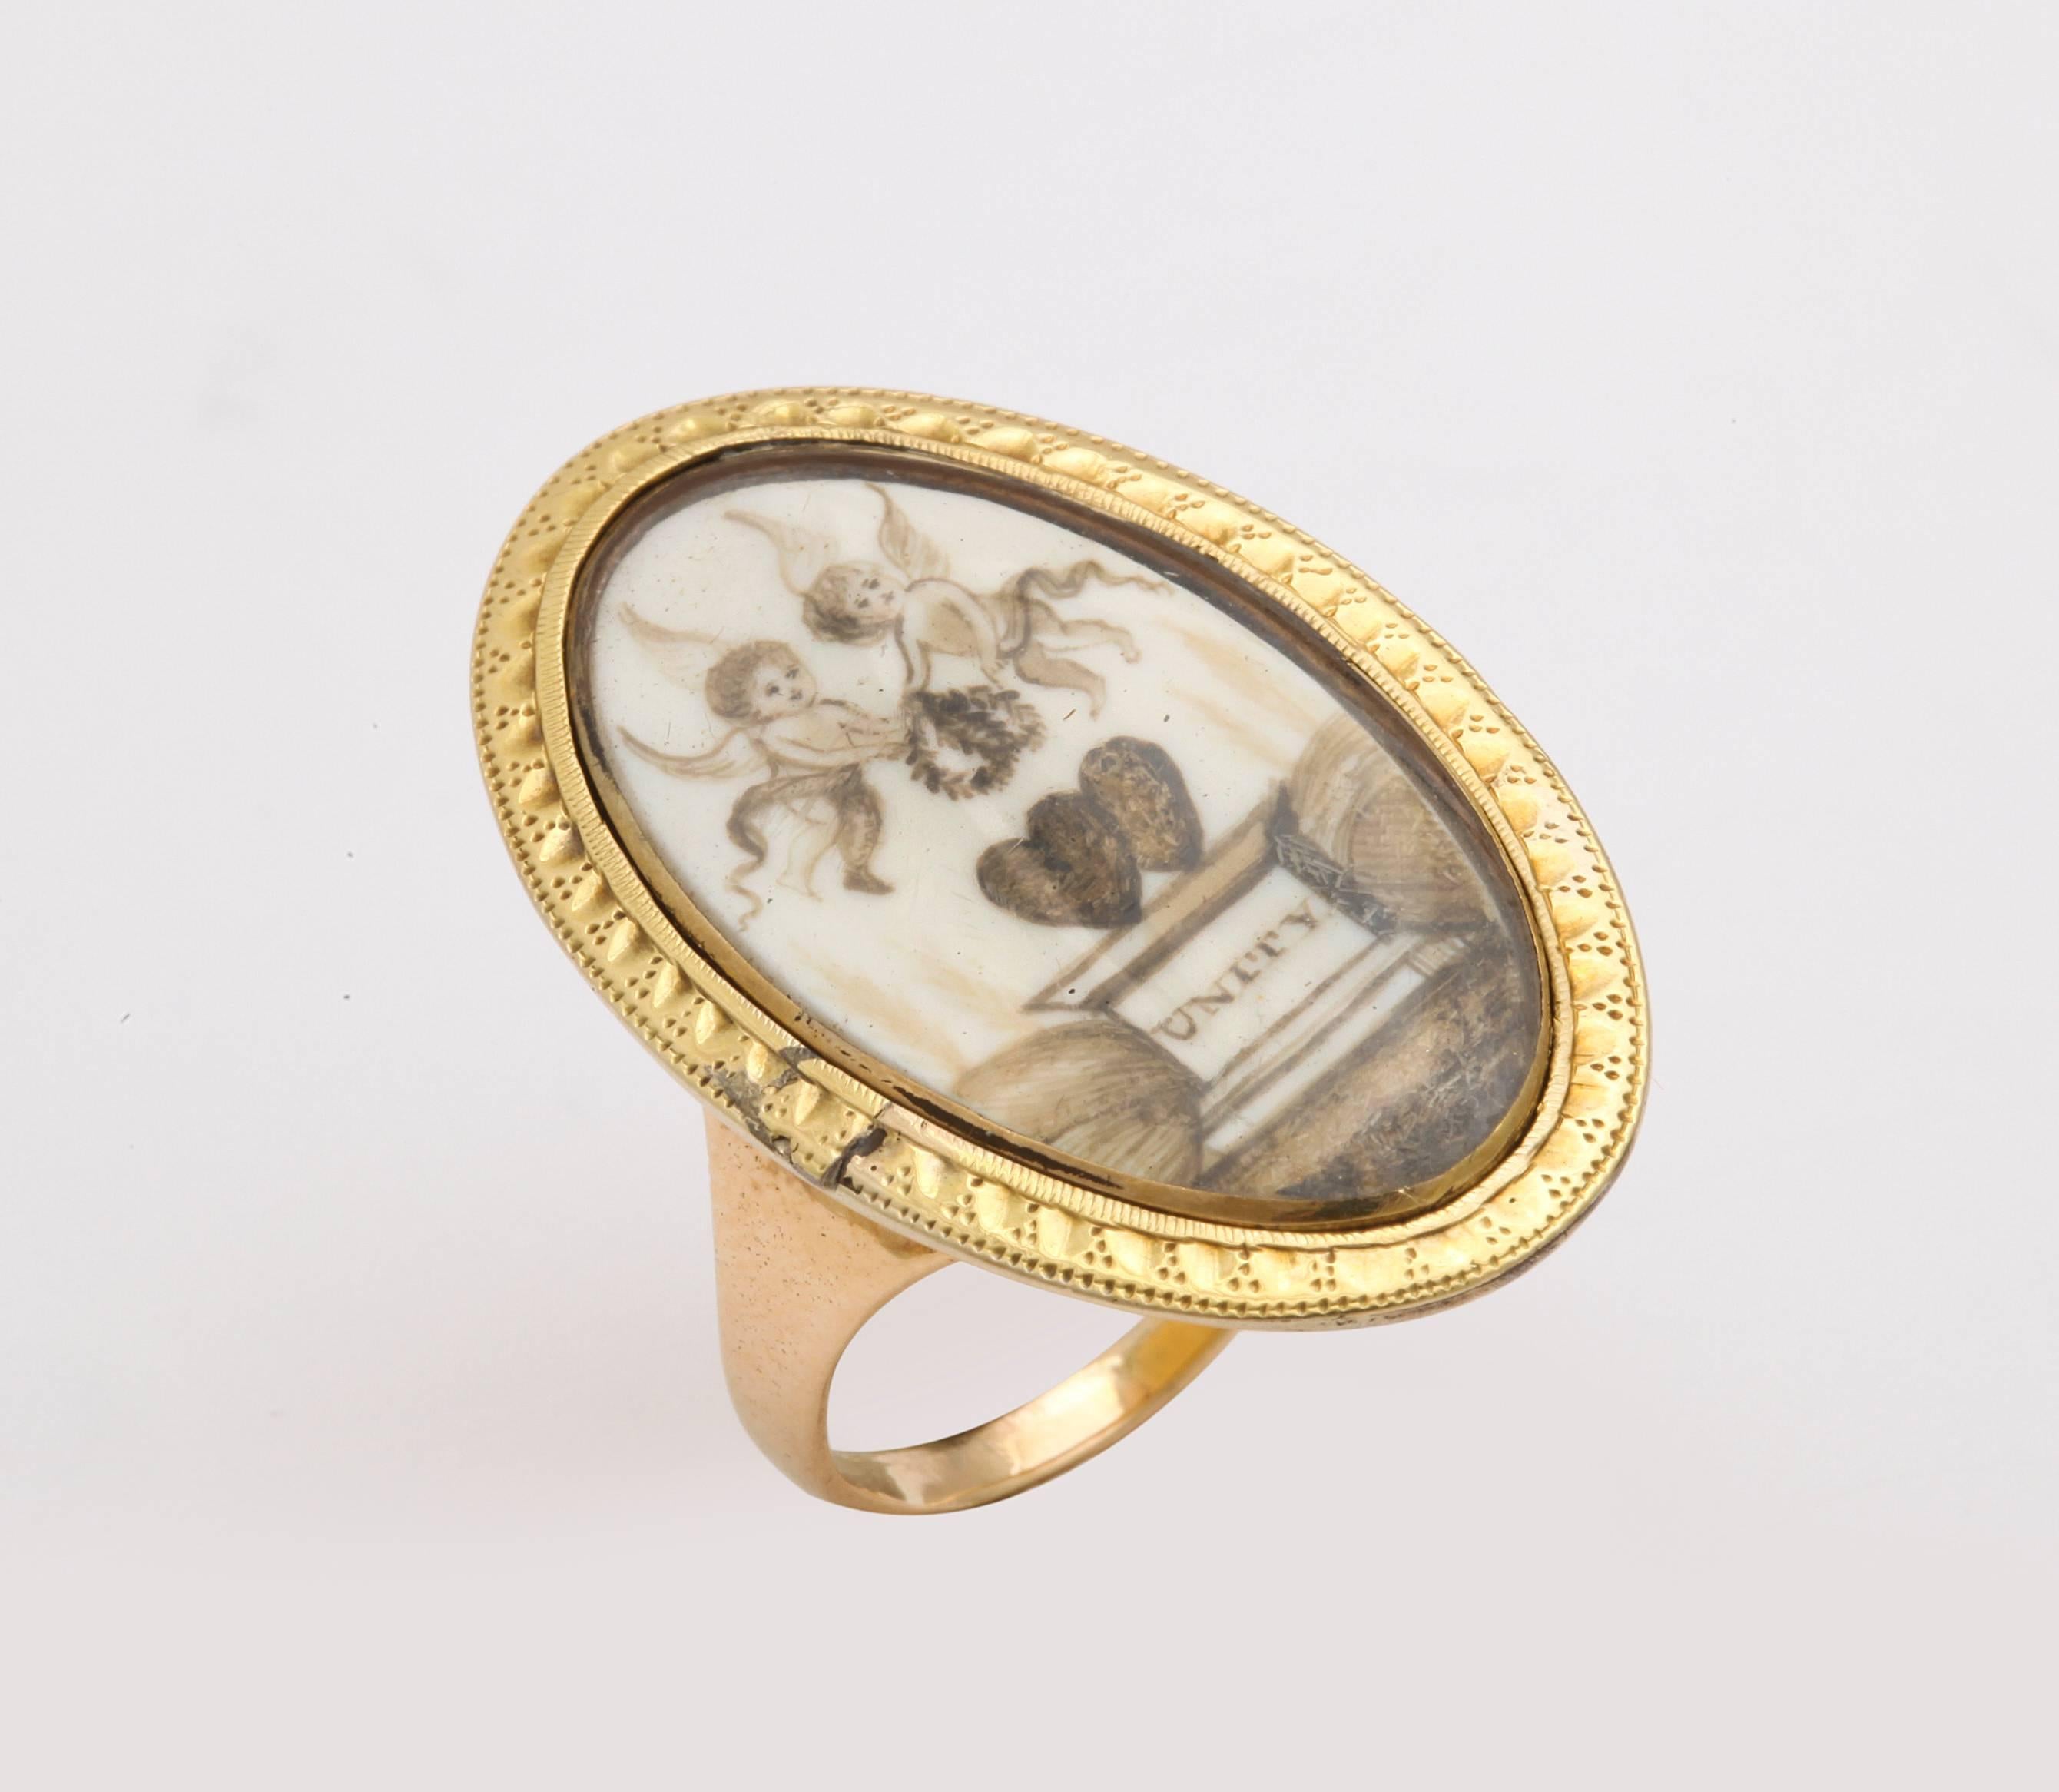 A 15kt  oval Georgian love token tells a story of enduring love, with a miniature painting of two youthful cupids, two entwined hearts and the story of love made in heaven til death do us part. All of this is beautifully painted and preserved on a